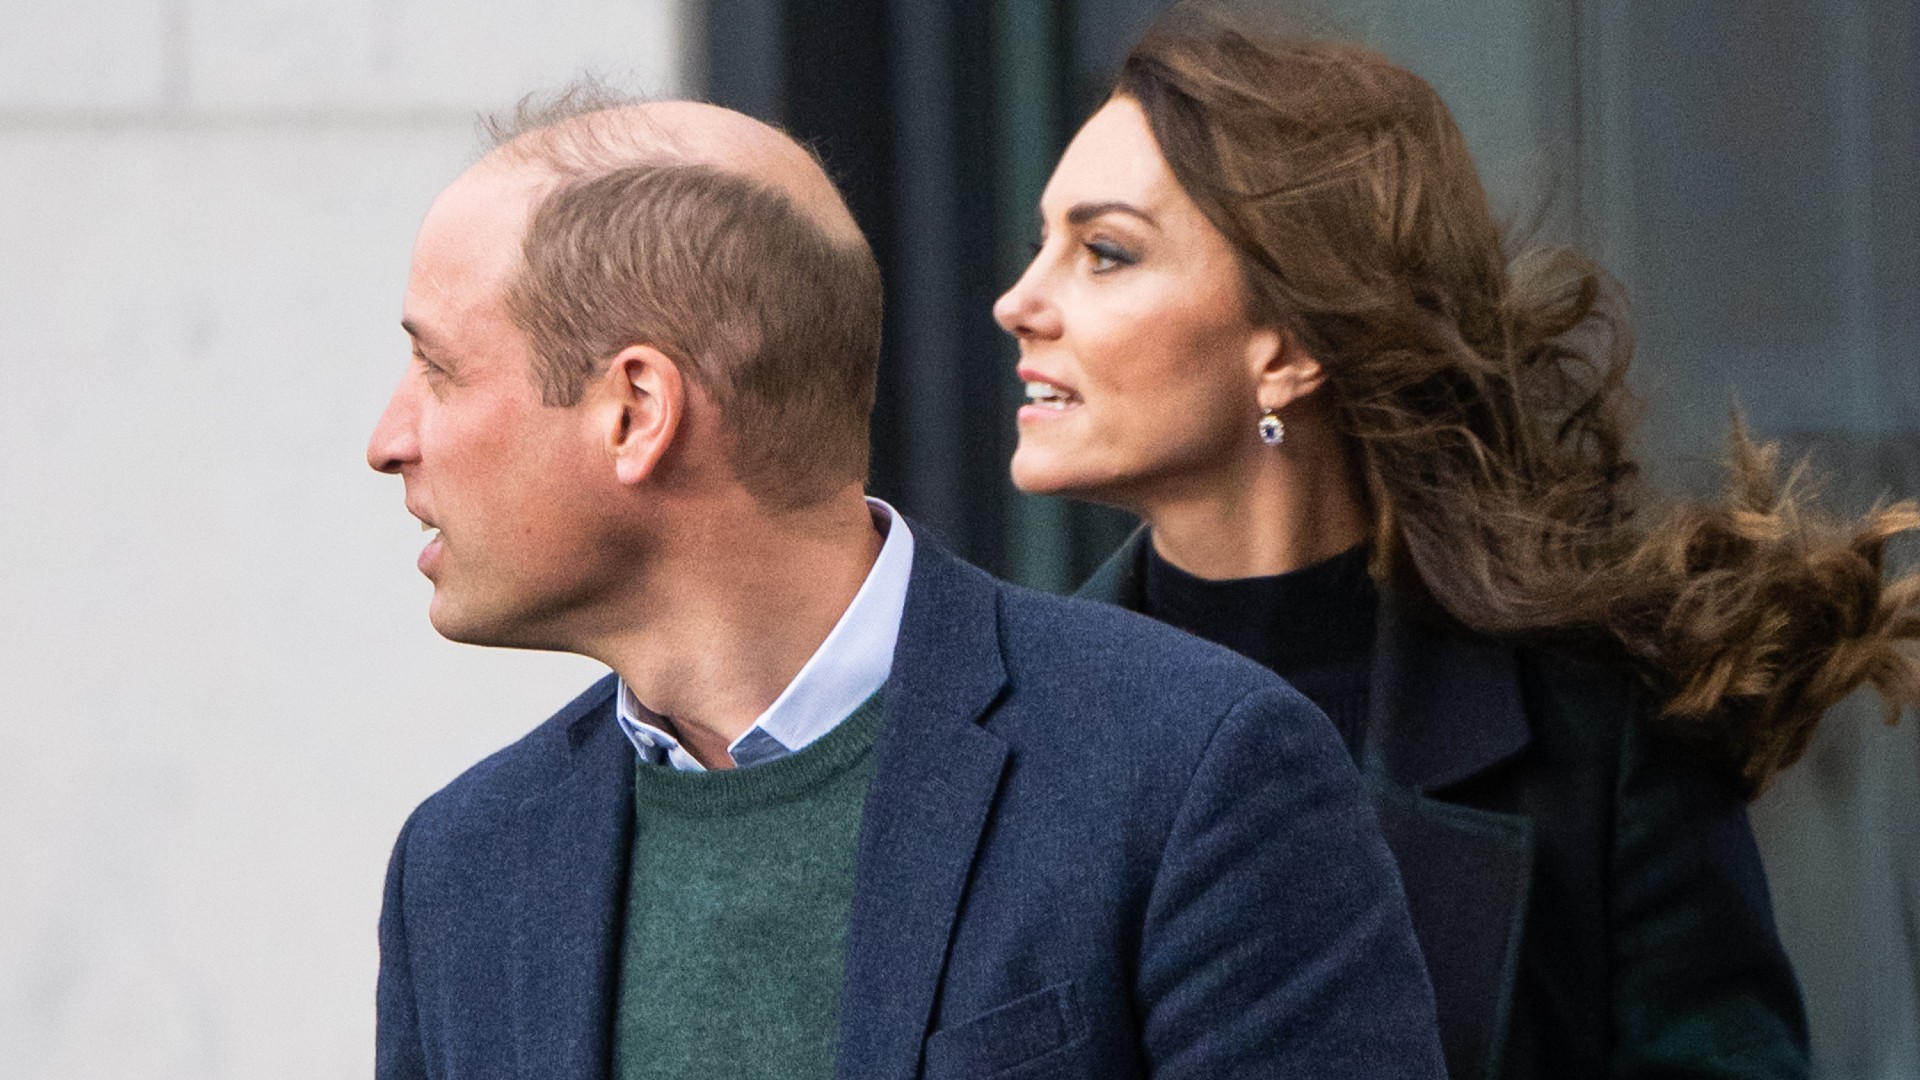 Kate Middleton supports Prince William at event that marks